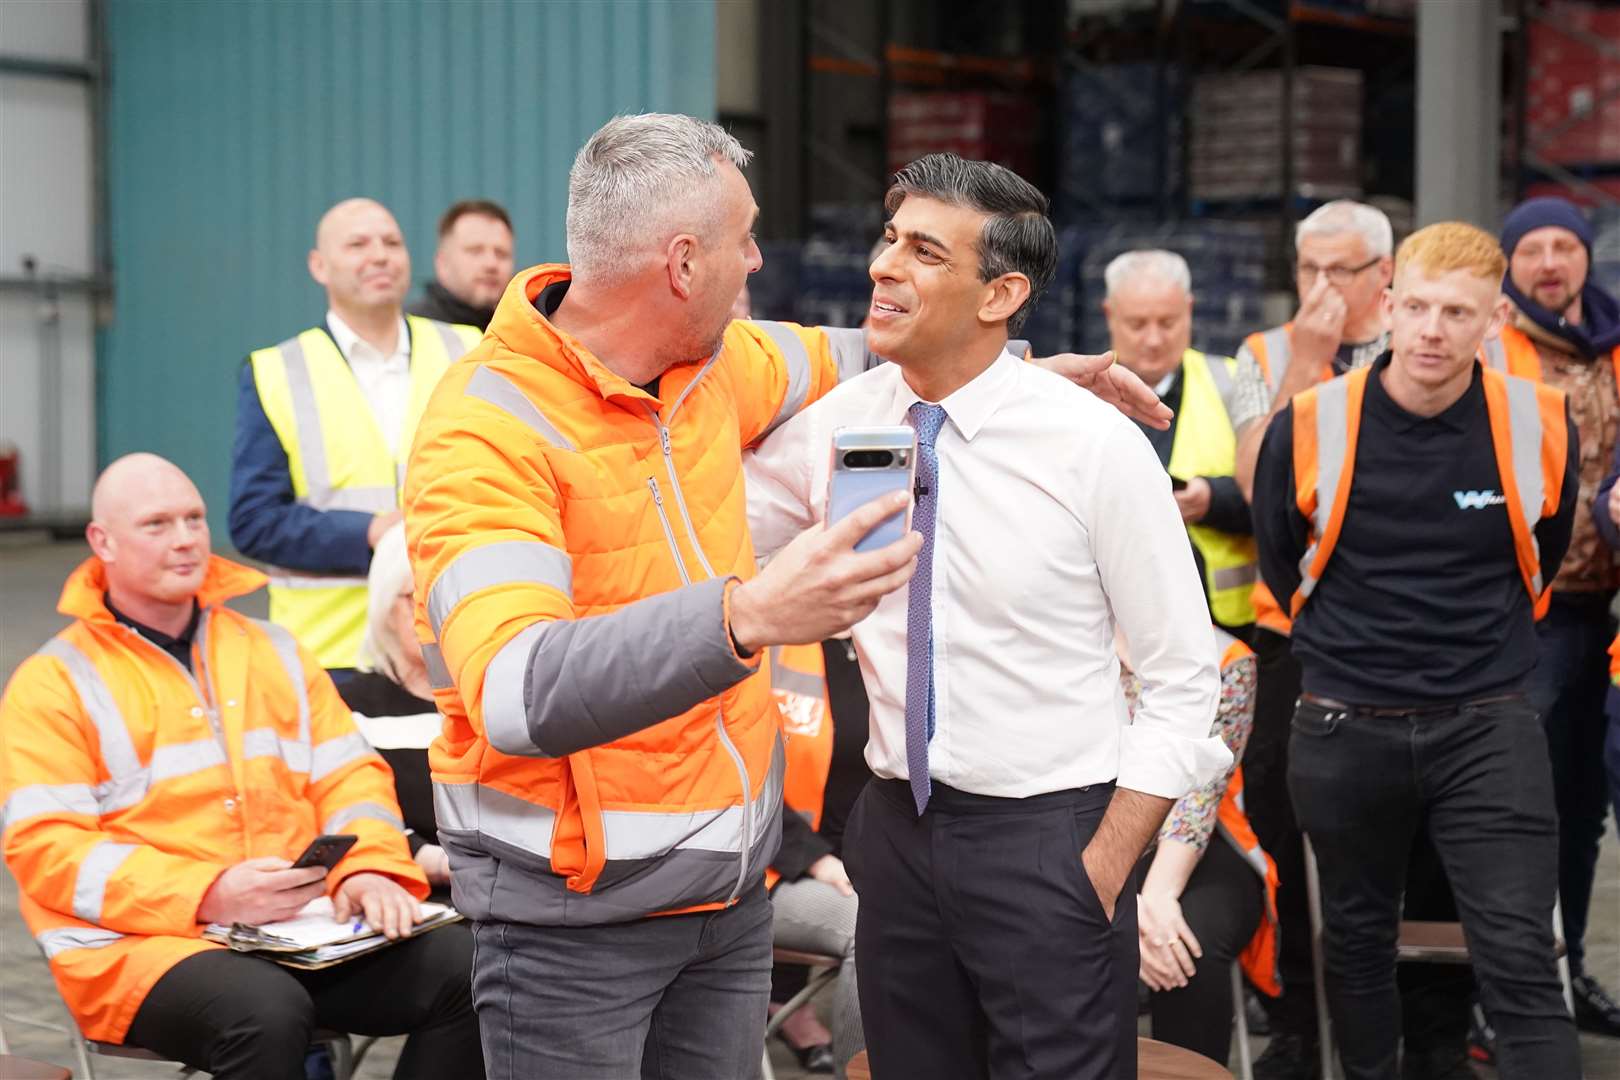 Mr Sunak was grabbed for a selfie during an earlier visit to answer questions from workers during a visit to West William Distribution in Ilkeston, Derbyshire (Stefan Rousseau/PA)